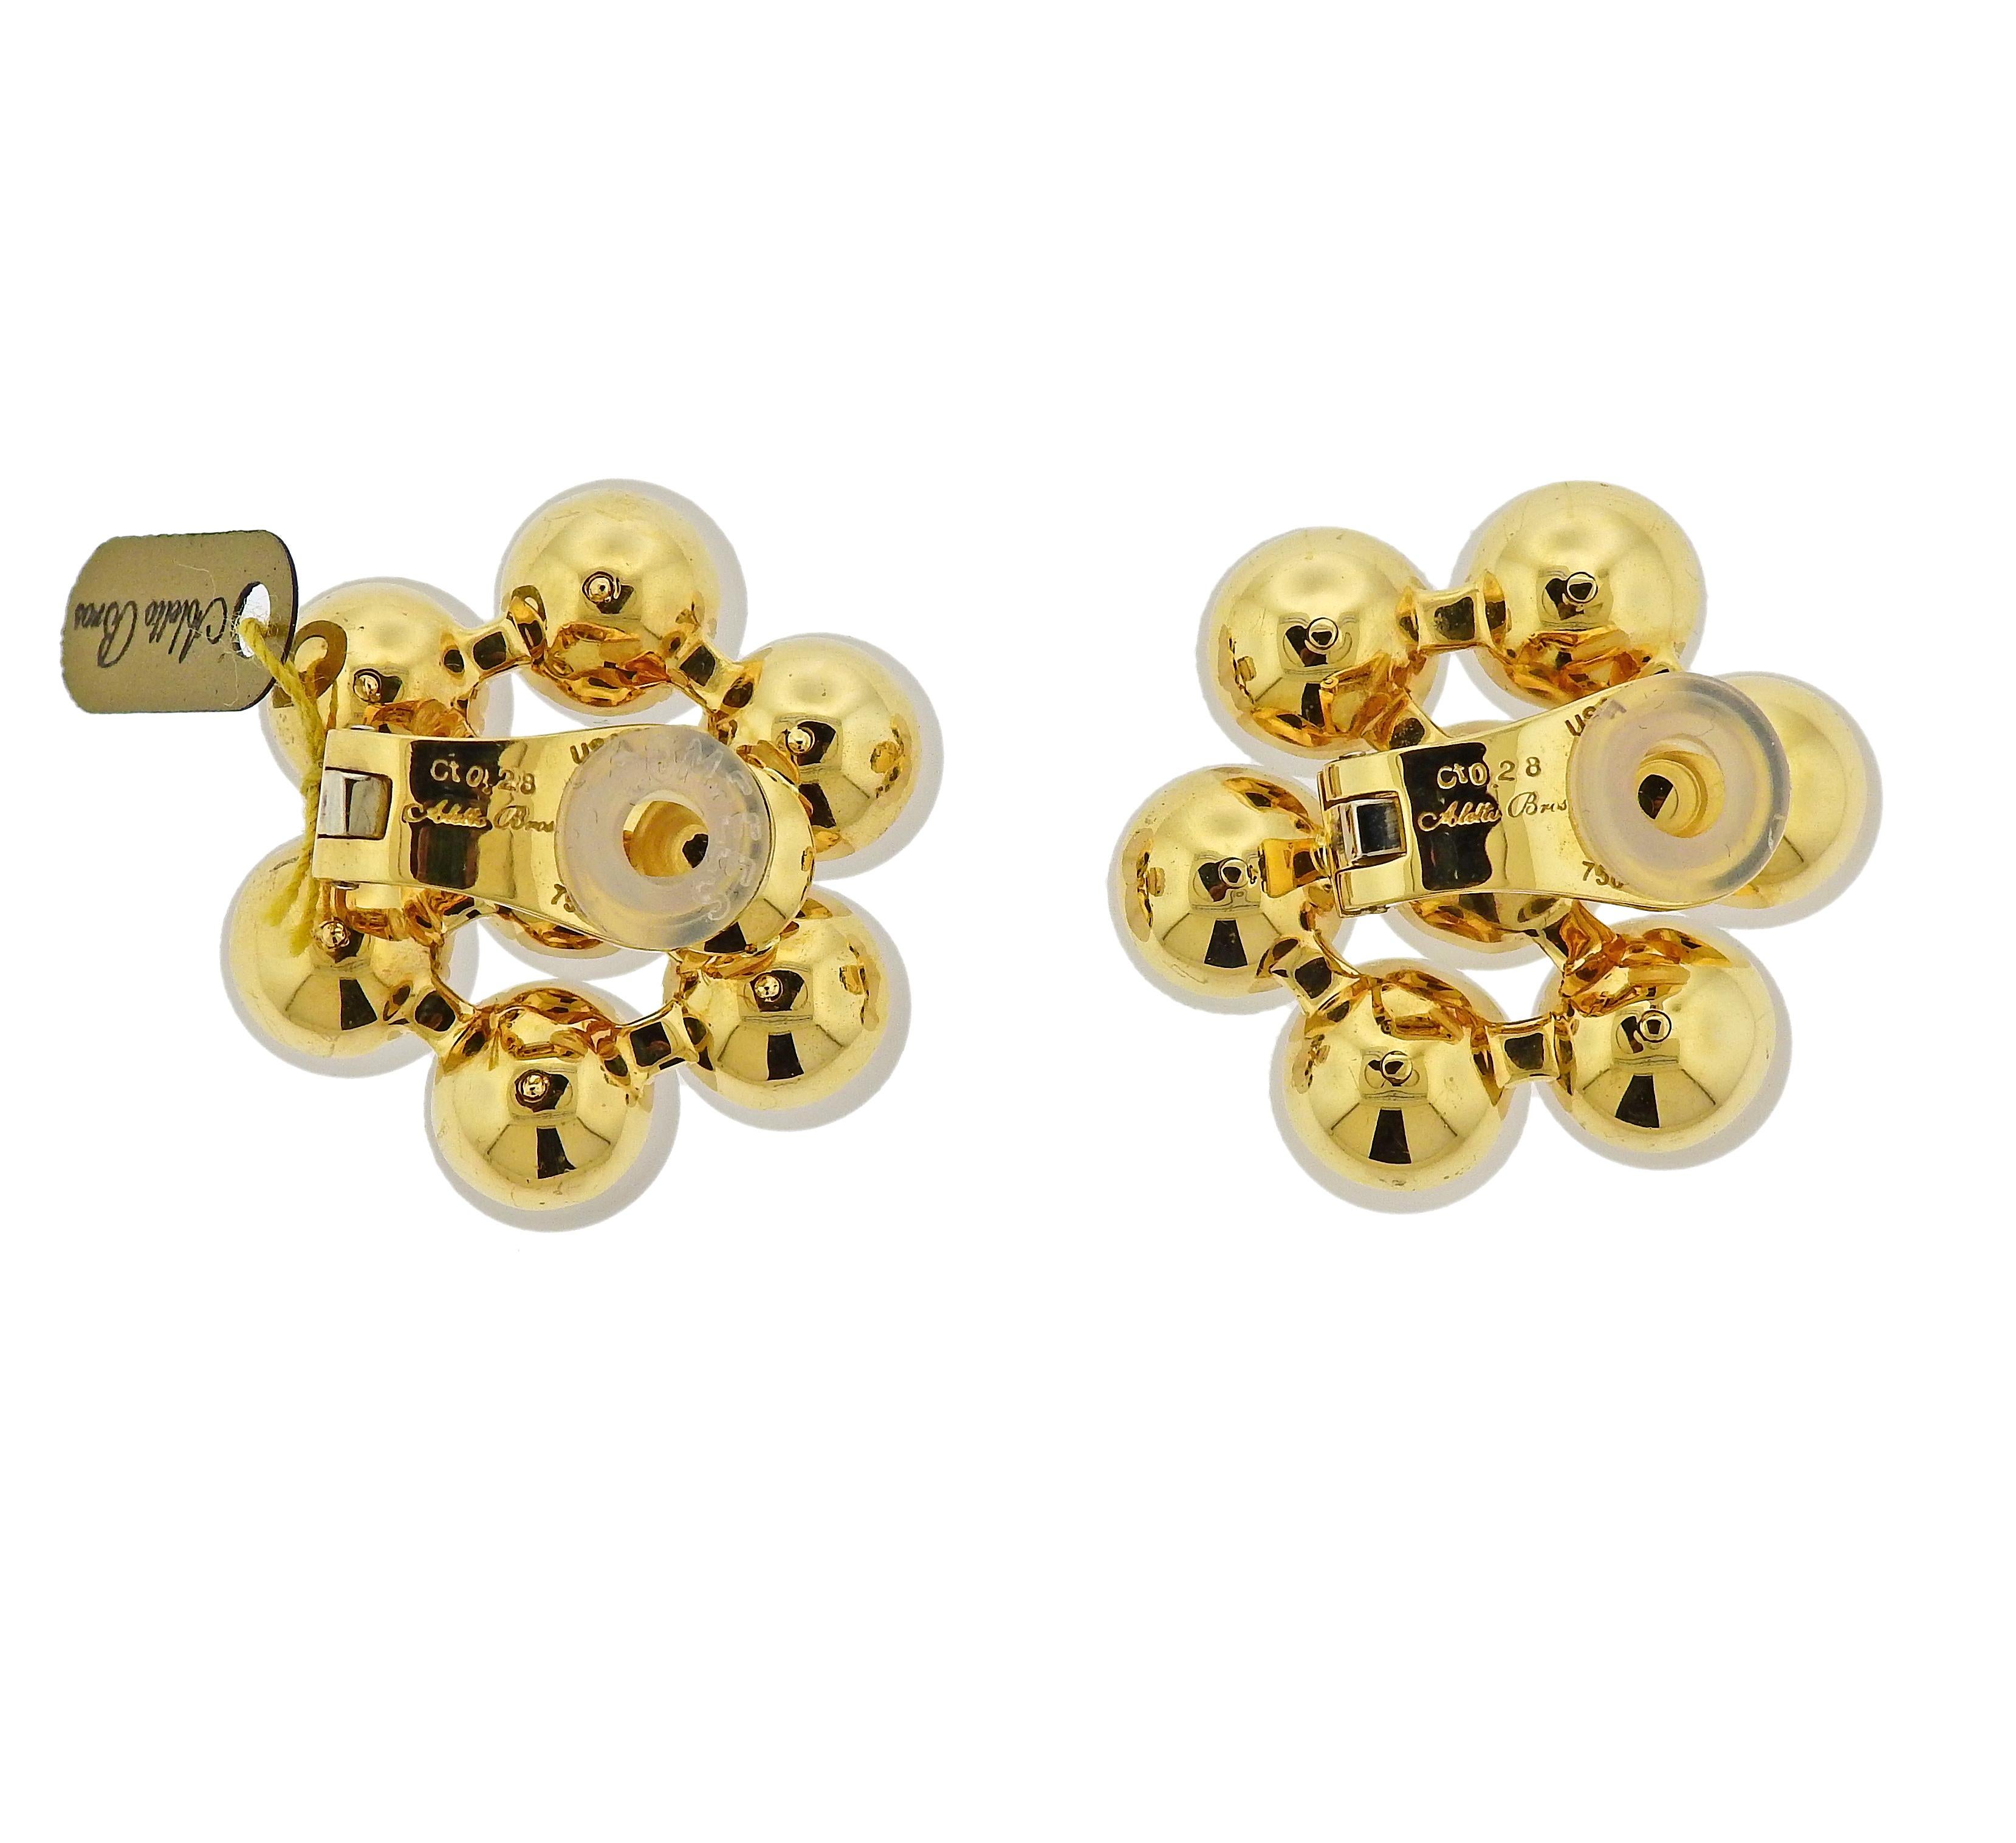 Pair of new 18k yellow gold earrings by Aletto Brothers, featuring frosted crystal balls, each set with a diamond in the center. Total weight 0.28ctw VVS-VS/G. Earrings are 31mm x 31mm. Weigh 45.7 grams. Marked: USA,750, Ct. 0.28, Aletto Bros.